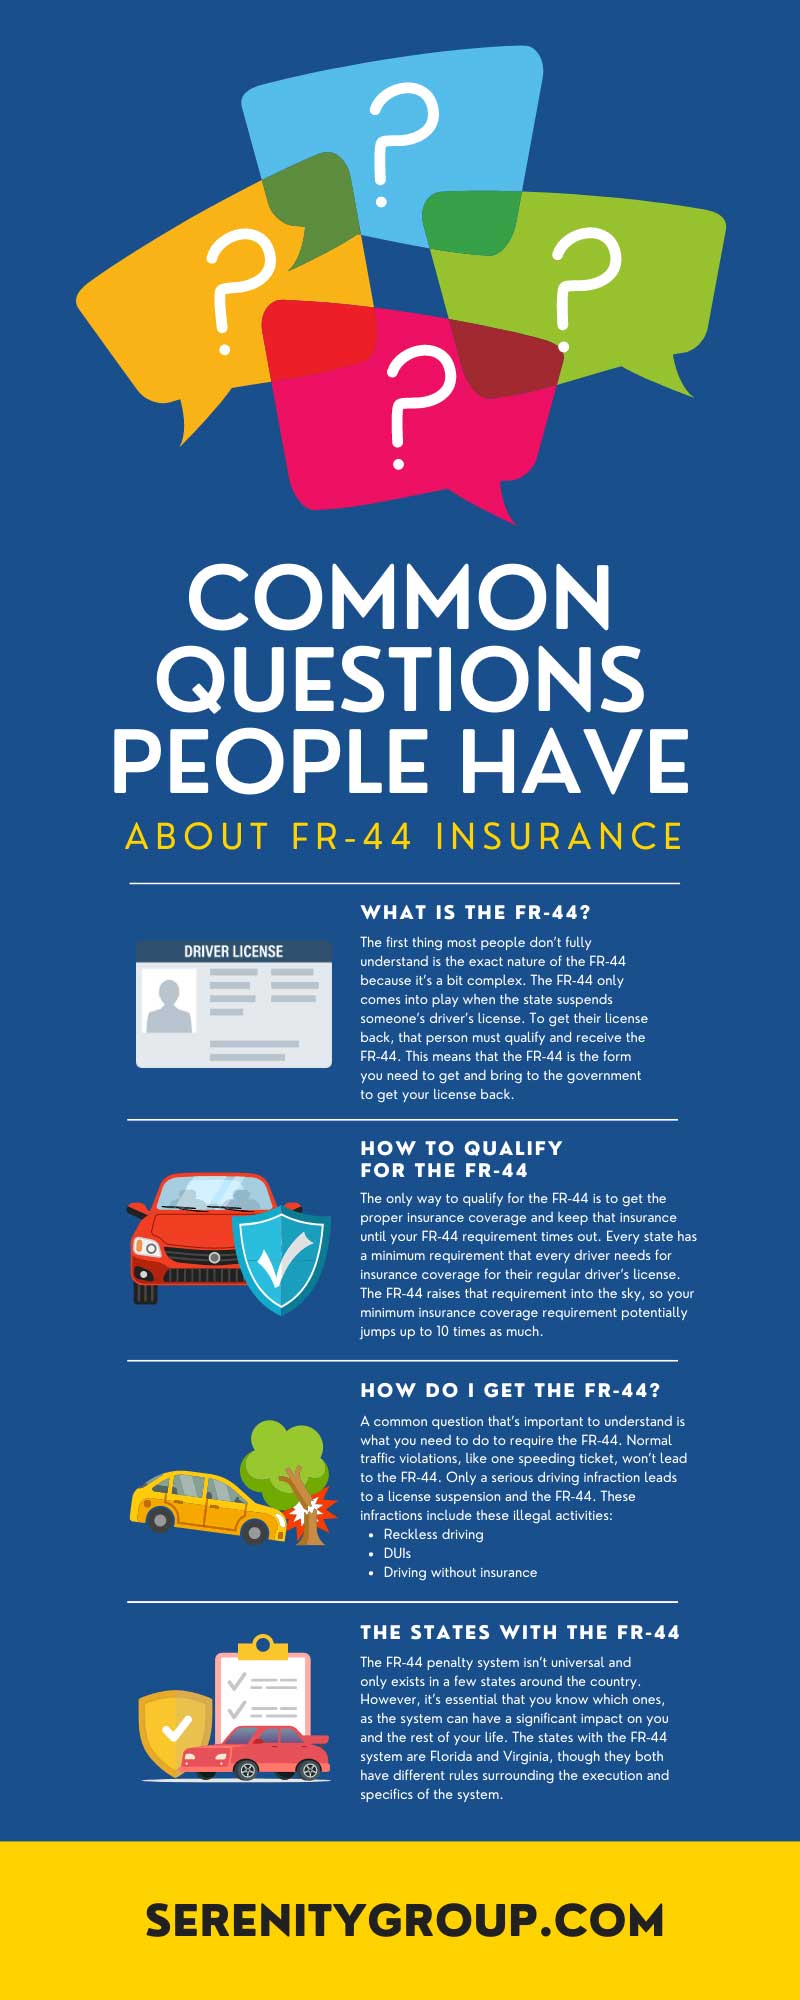 Common Questions People Have About FR-44 Insurance
